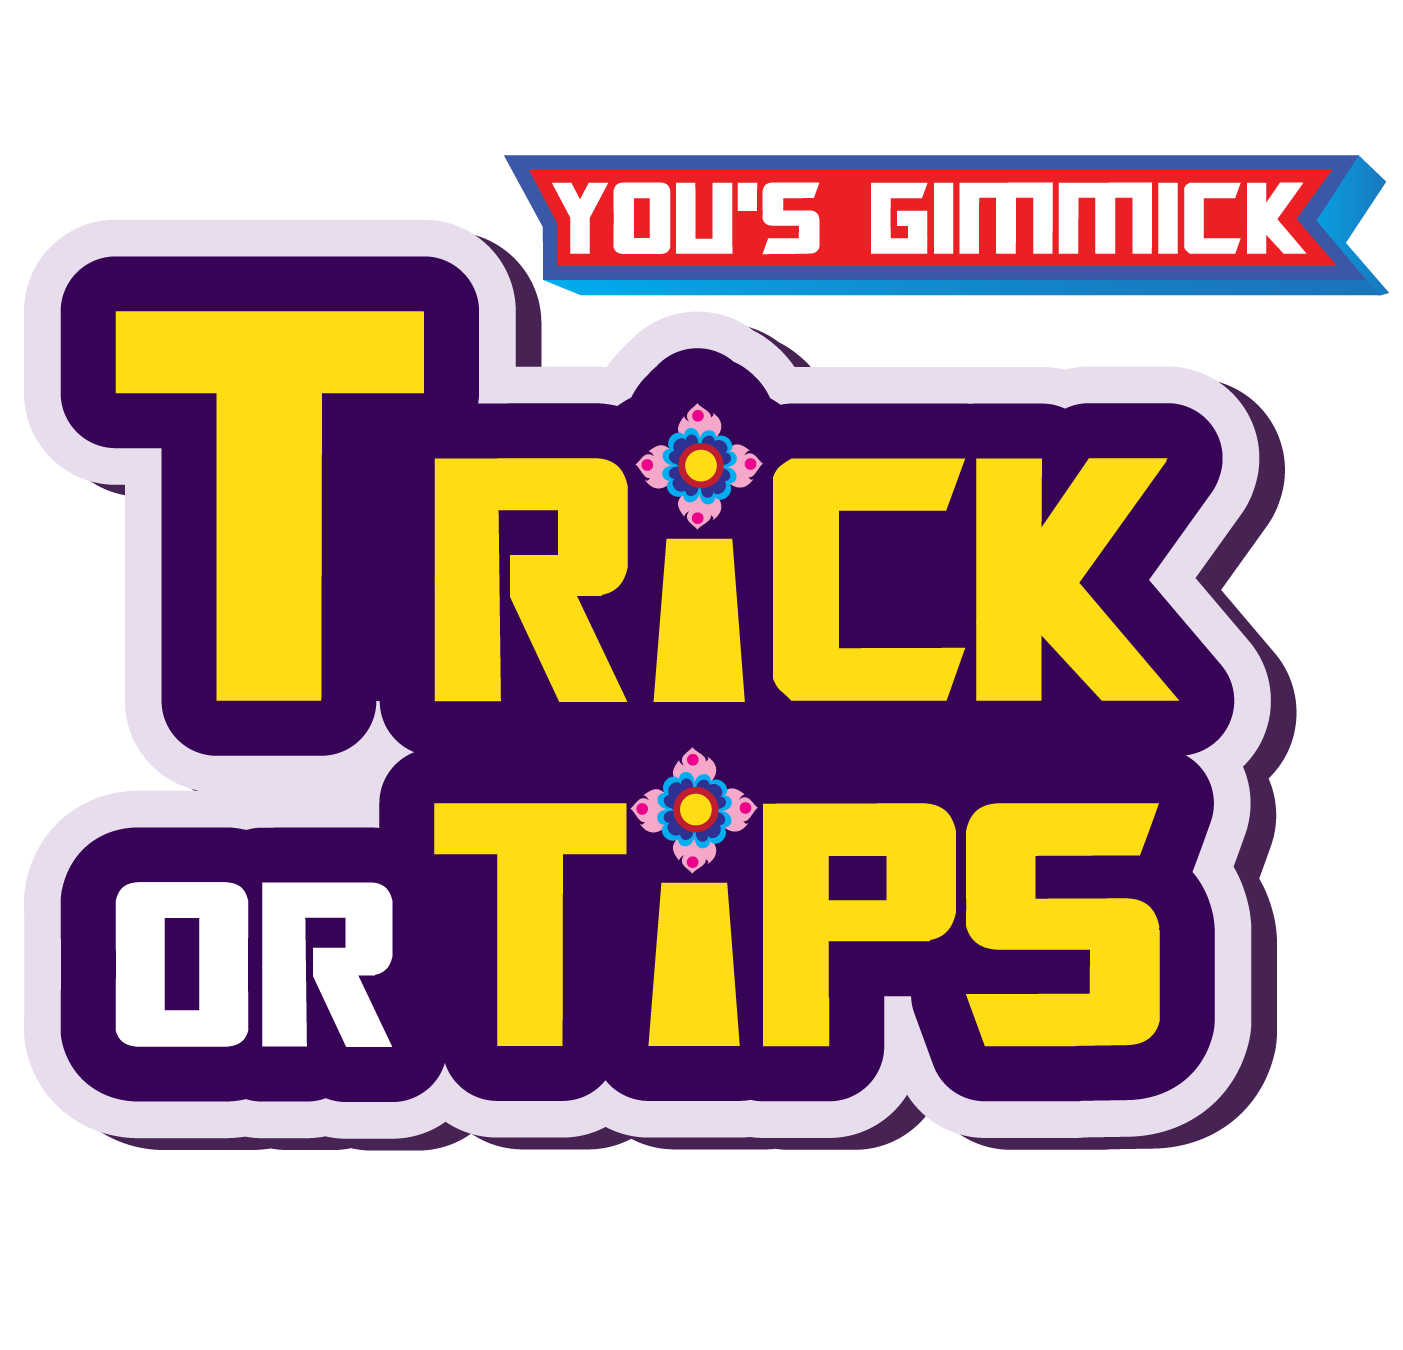 trick or tips